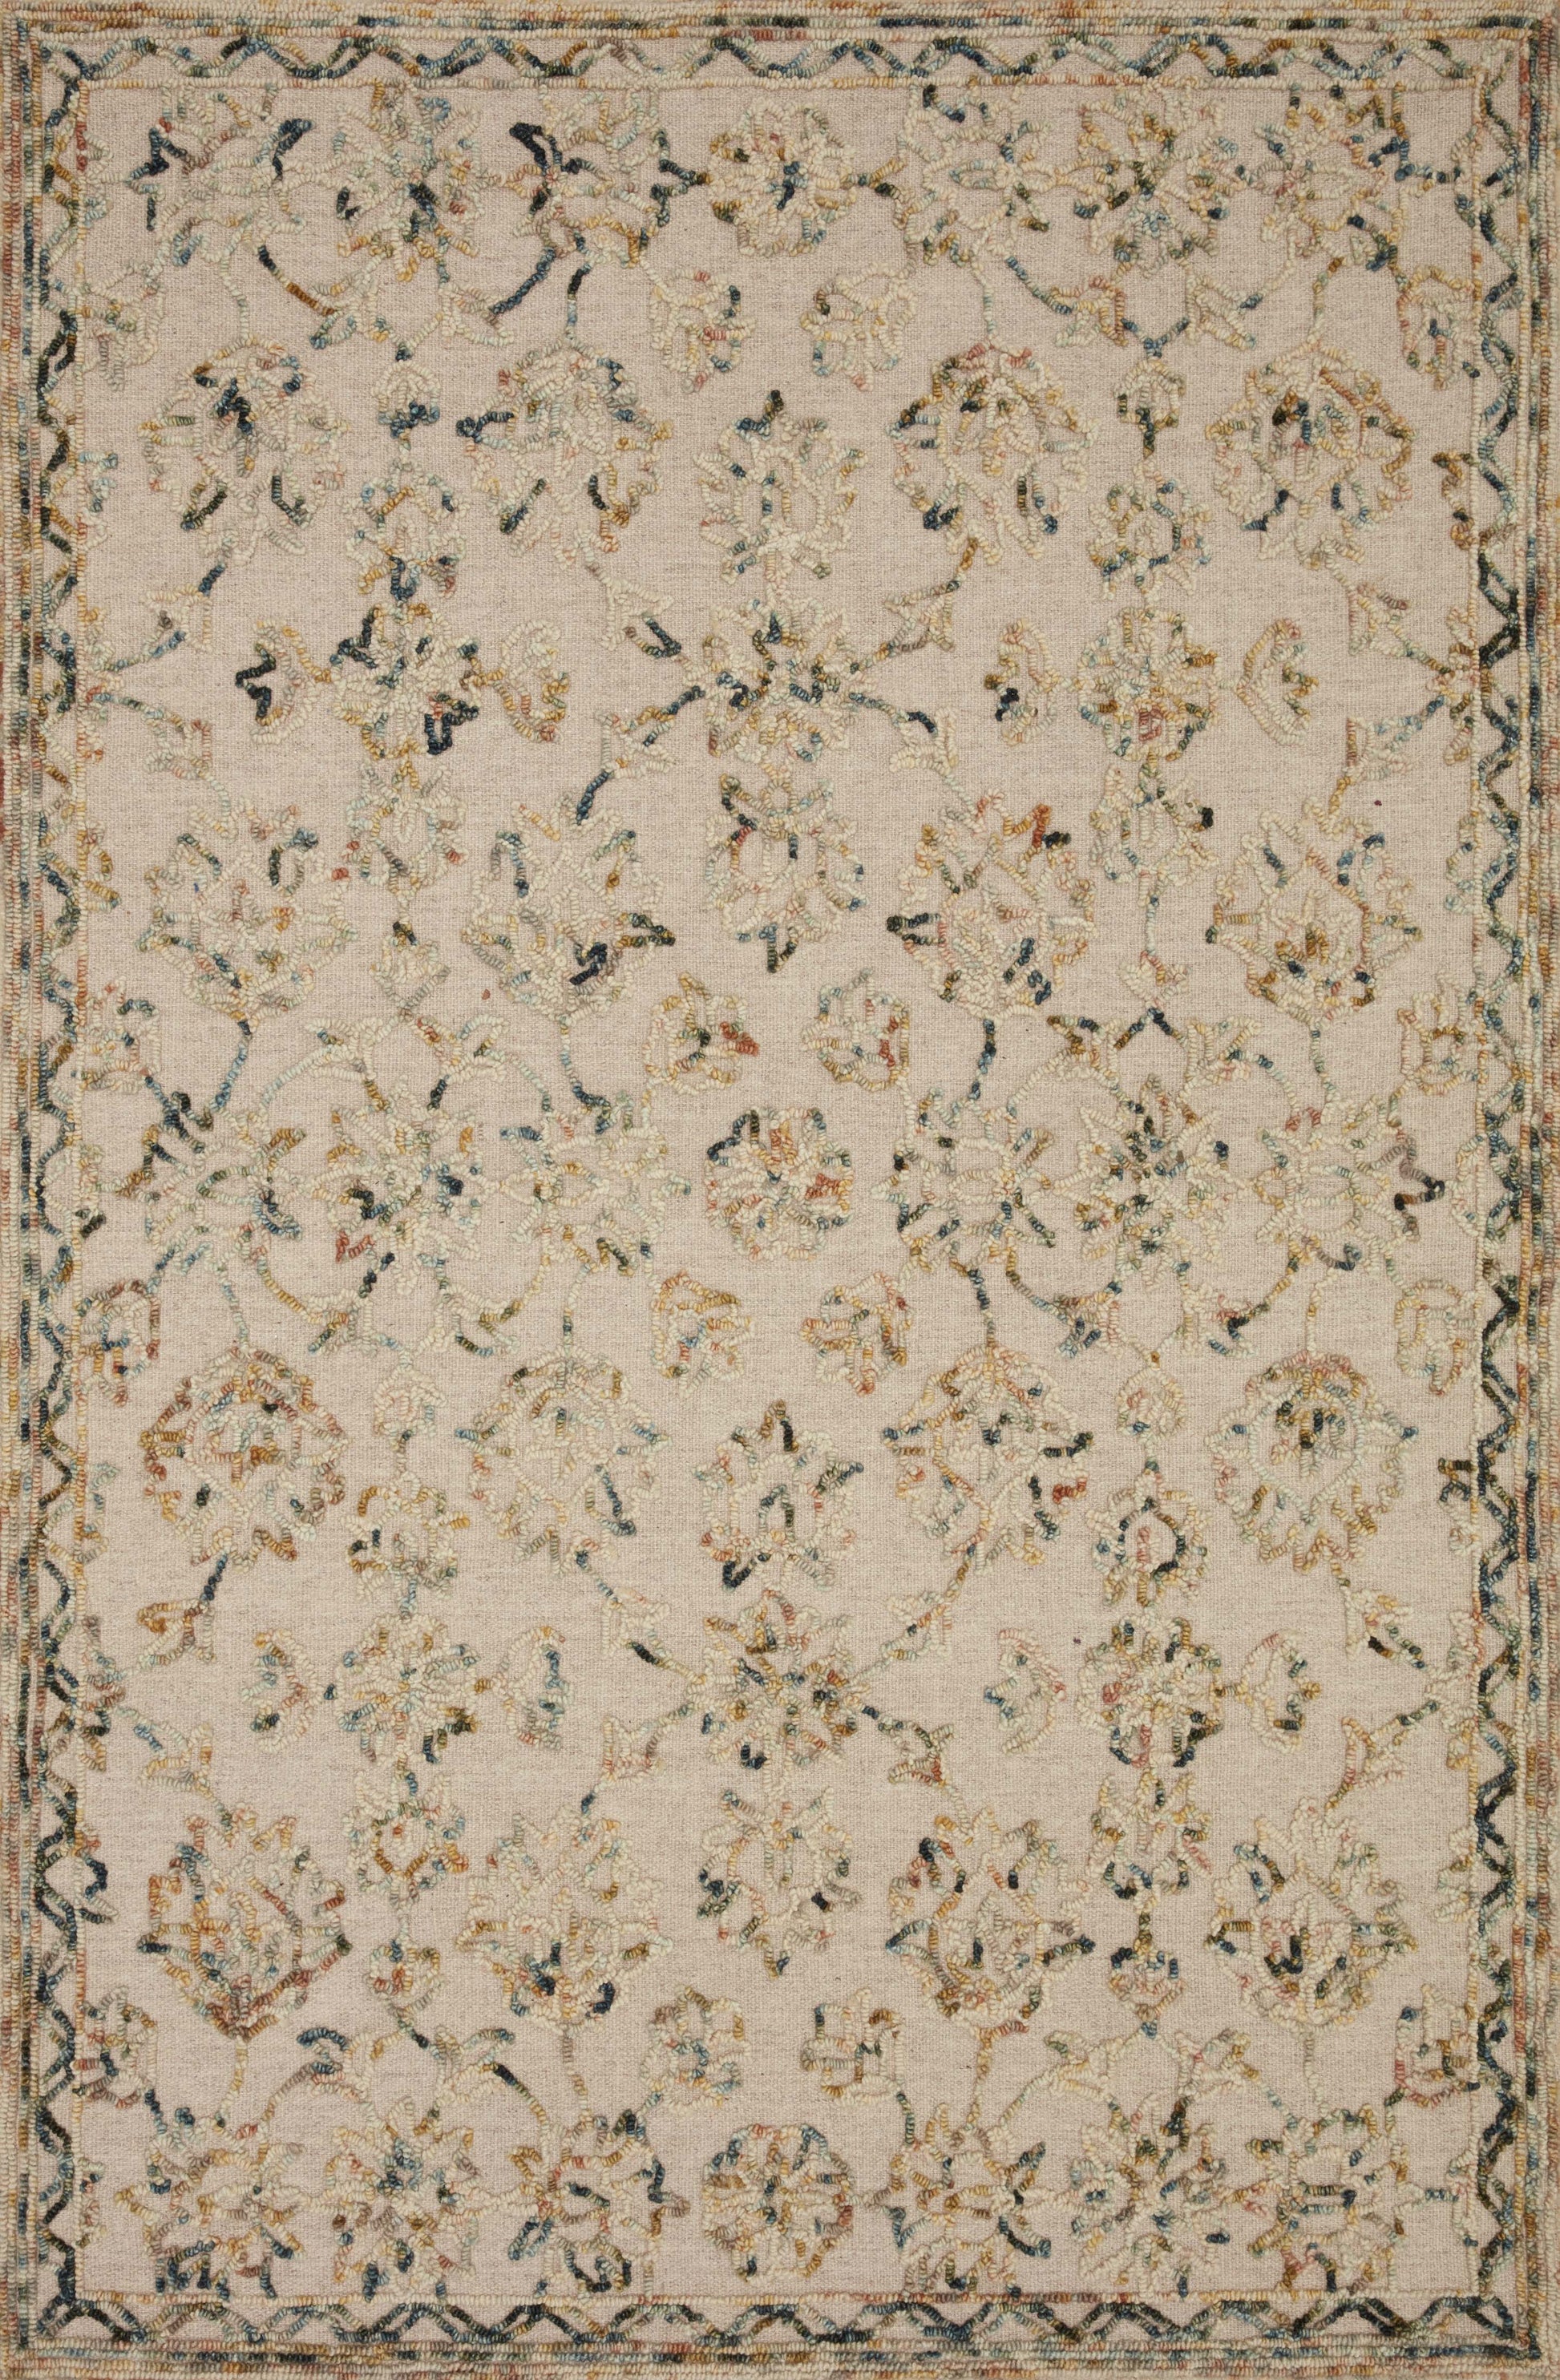 A picture of Loloi's Halle rug, in style HAE-04, color Lagoon / Multi